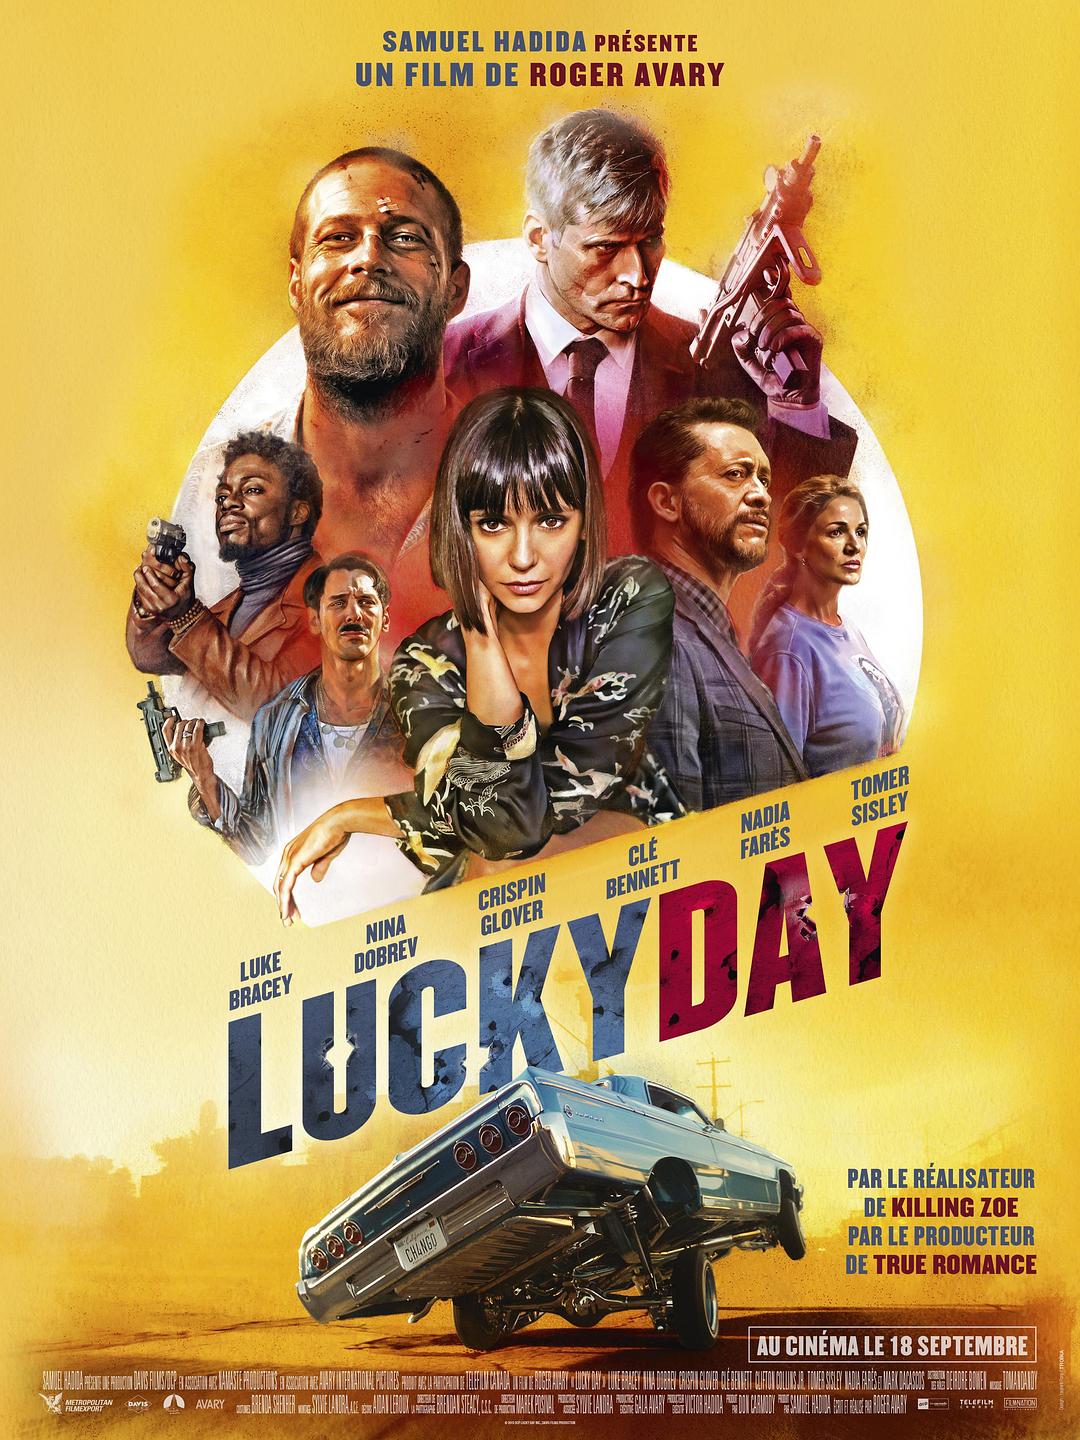  Lucky.Day.2019.1080p.BluRay.AVC.DTS-HD.MA.5.1-FGT 22.40GB-1.png